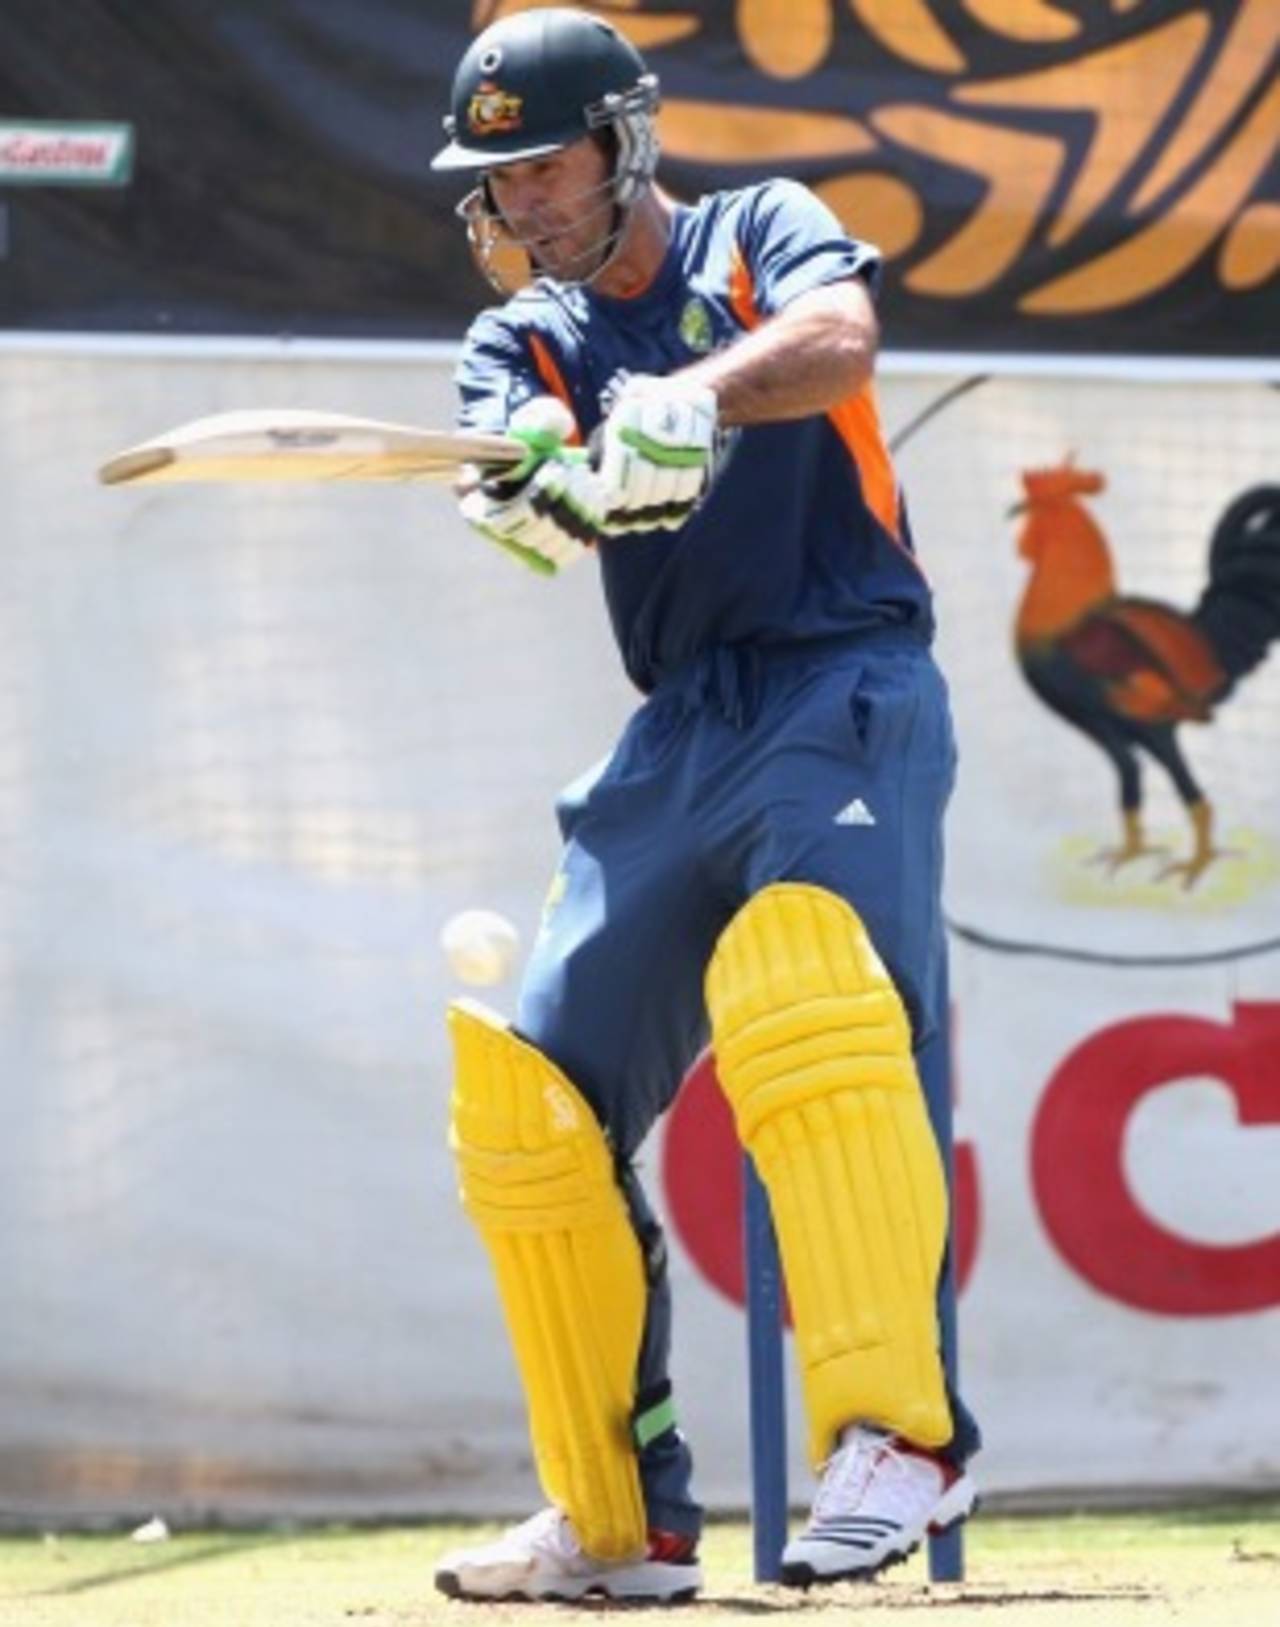 Ricky Ponting bats in the nets on the eve of Australia's quarter-final against India, World Cup, Ahmedabad, March 23, 2011